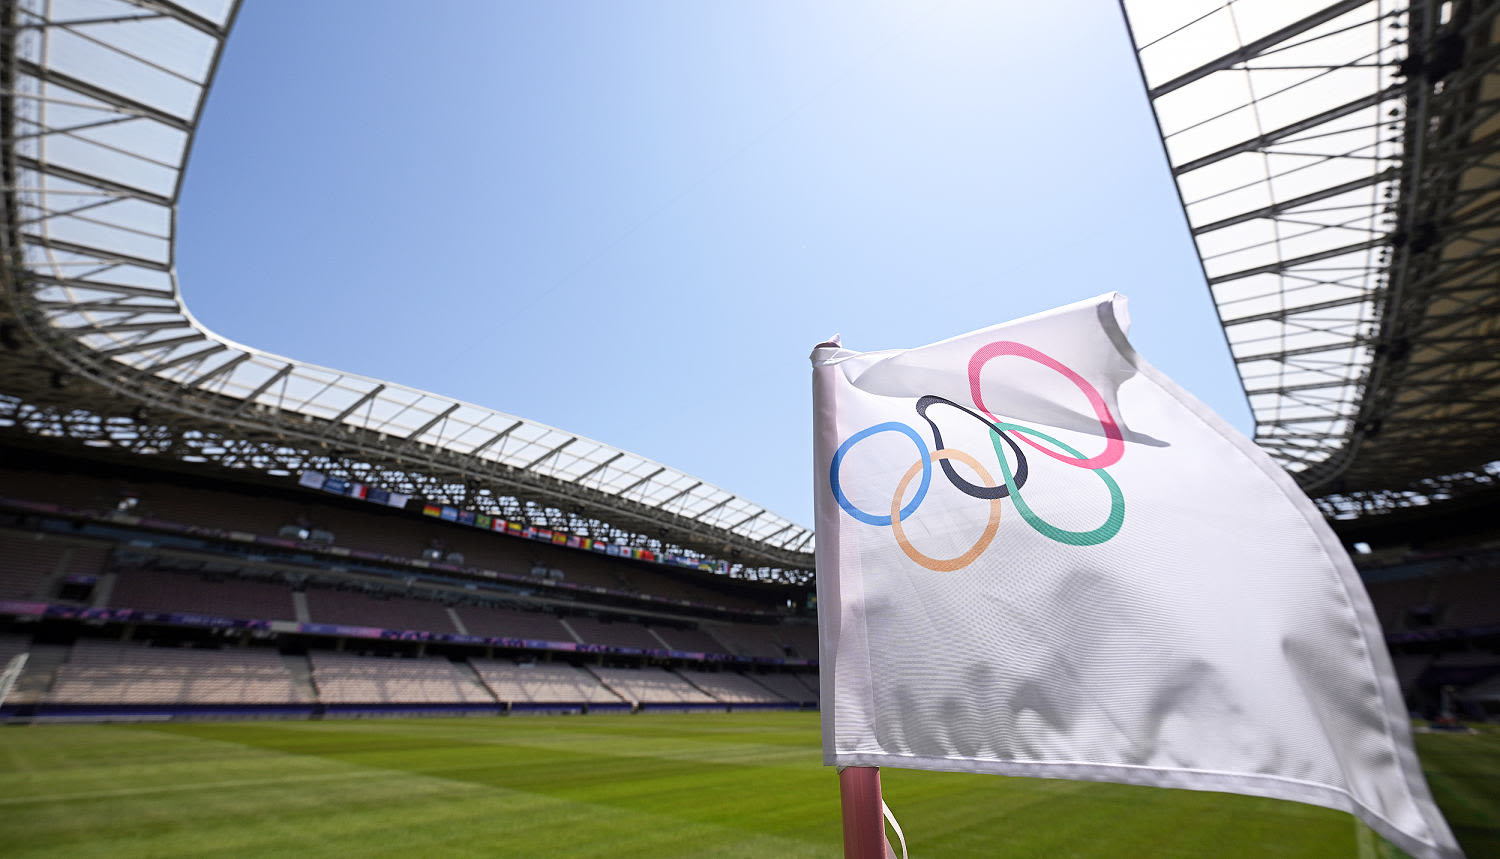 How to watch the opening ceremony at the 2024 Paris Olympics